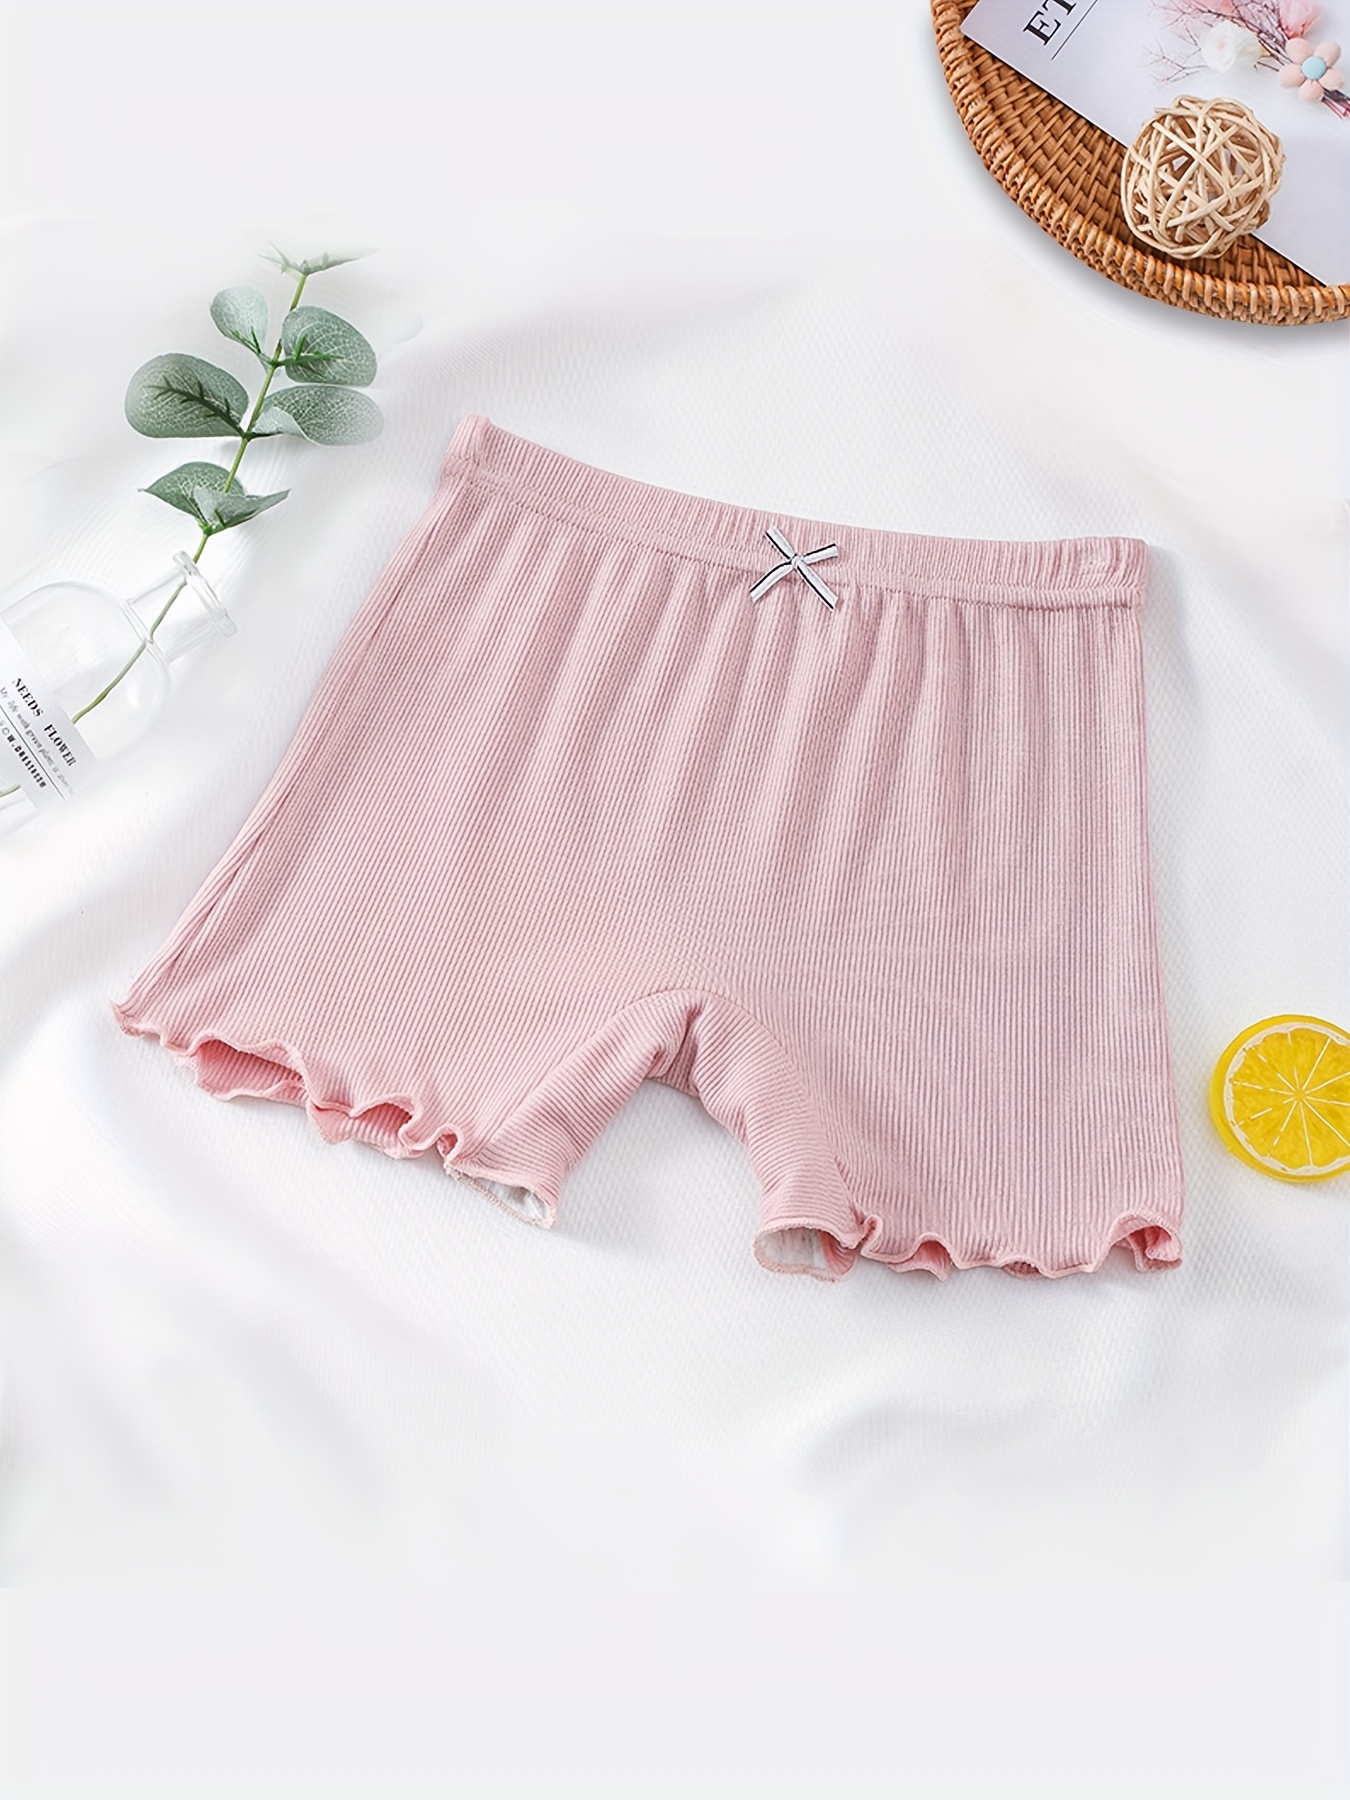 Summer Modal Safety Pants For Girls Aged 3 12 Years Old Secure Hip Boxer  Toddler Underwear From Paozhanghua, $6.32